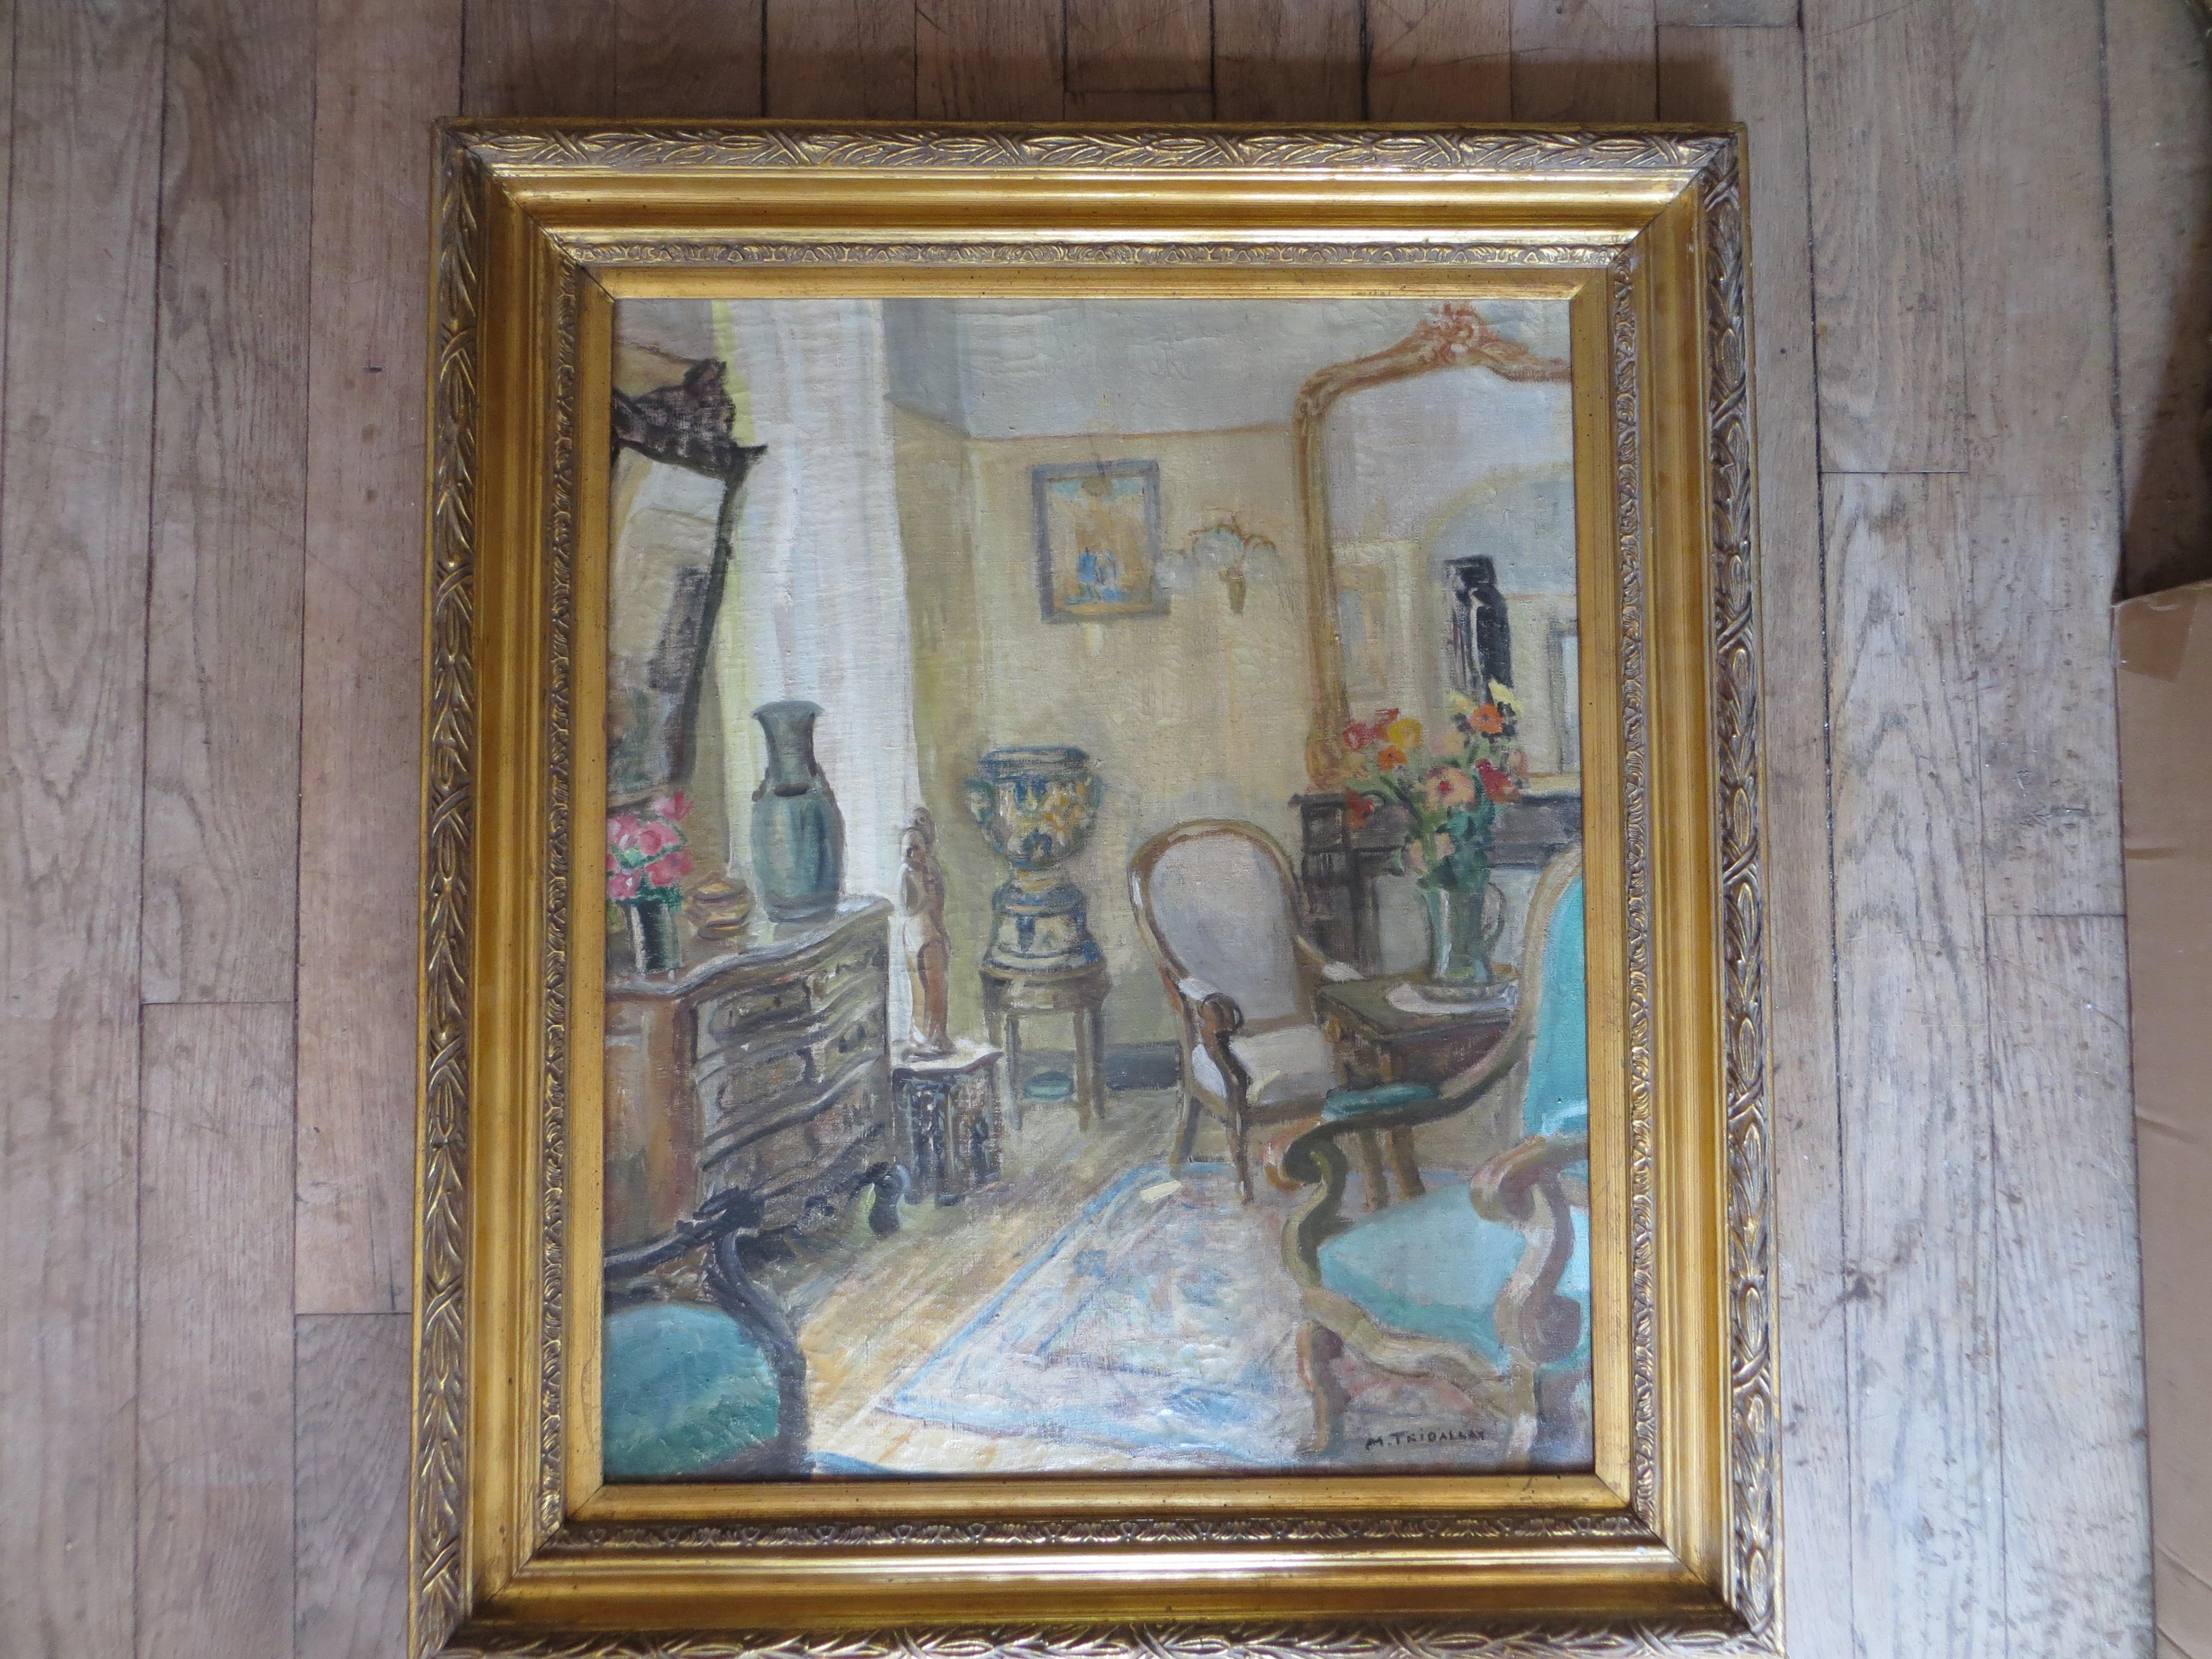 French interior  - Painting by Unknown